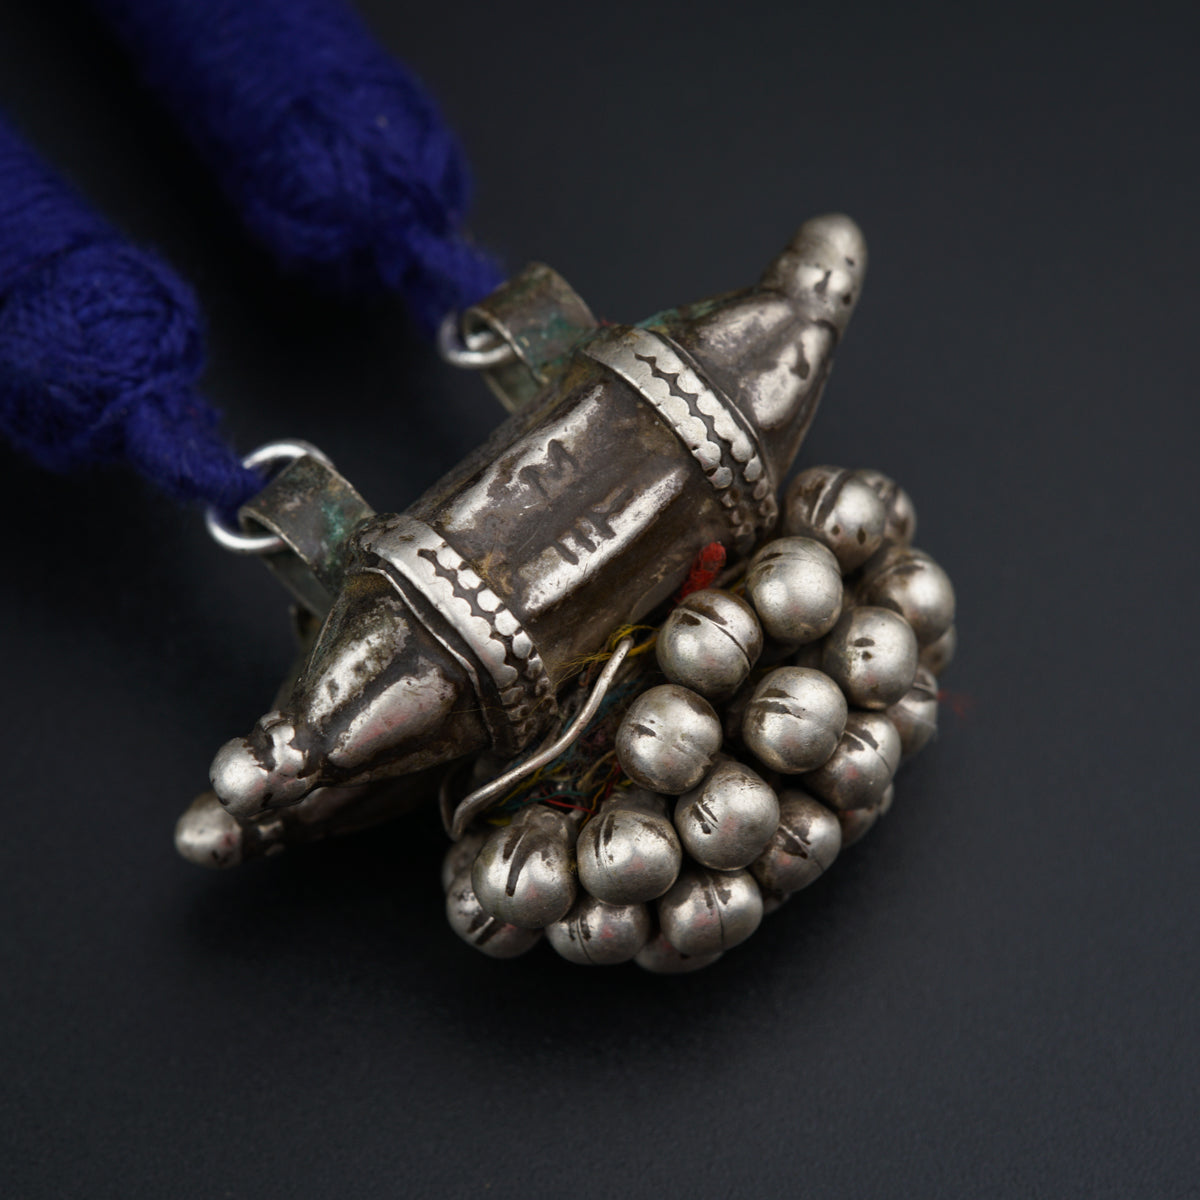 a silver object with bells attached to it